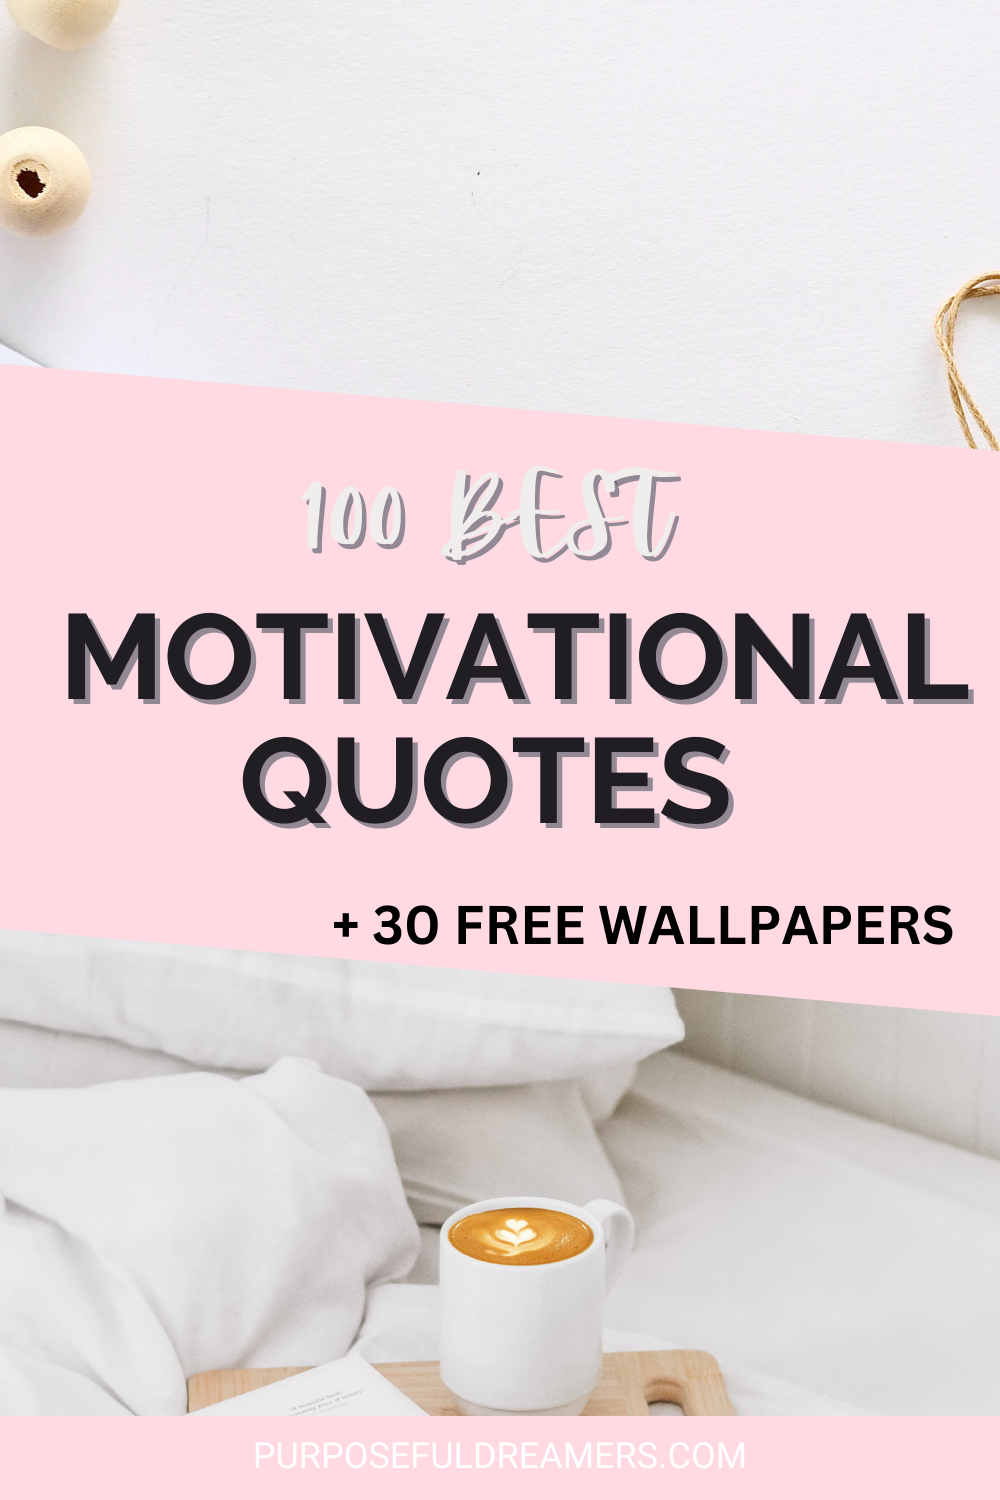 100 Motivational Quotes that Will Inspire You - PURPOSEFUL DREAMERS